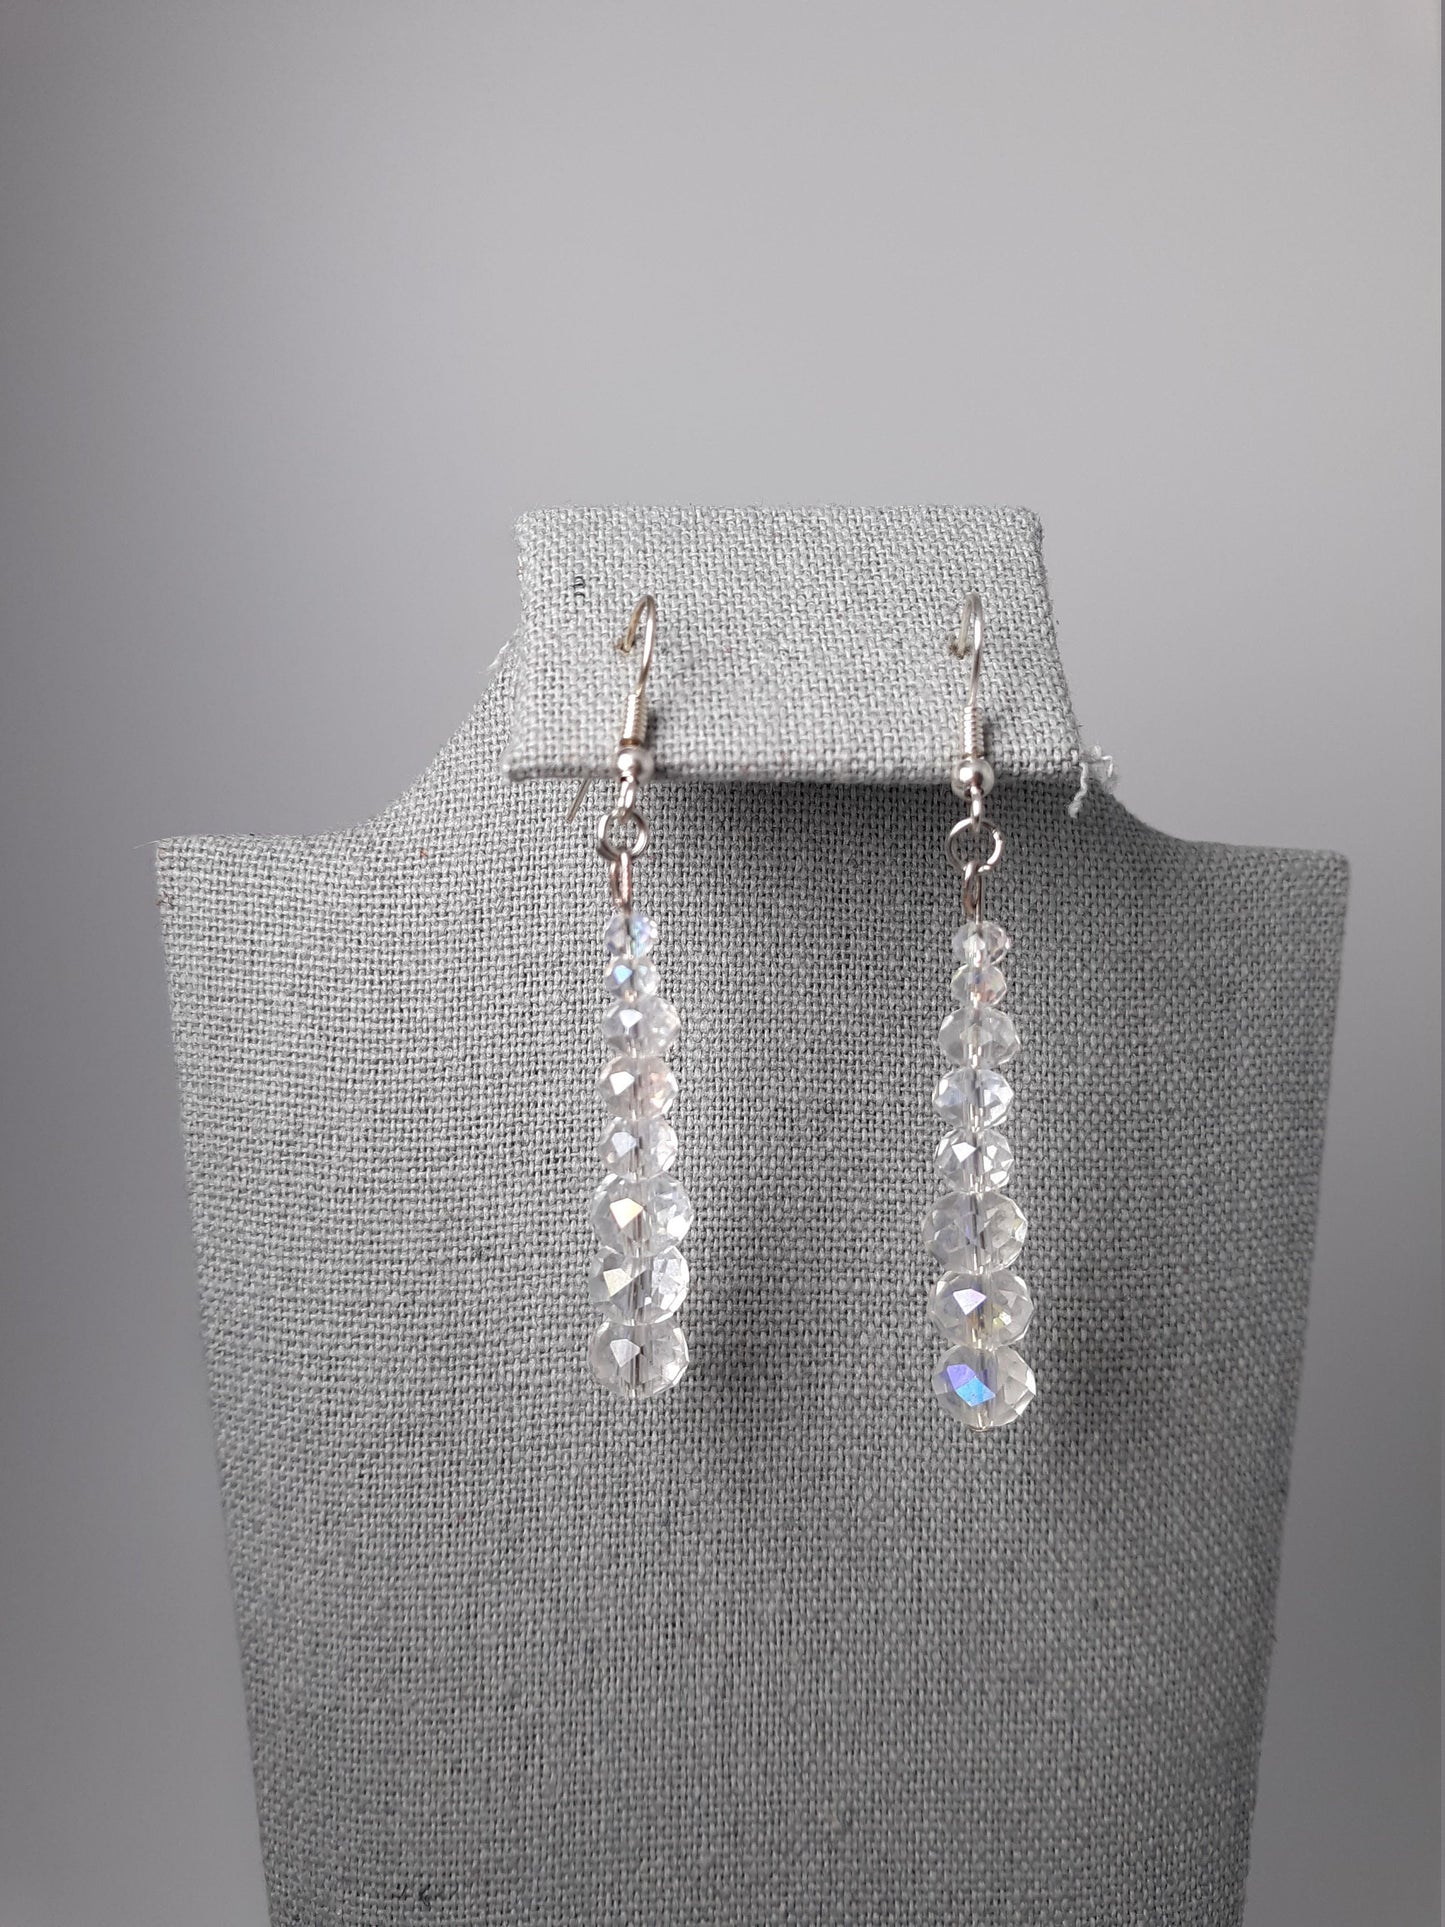 Sparkly Icy Icicle Earrings